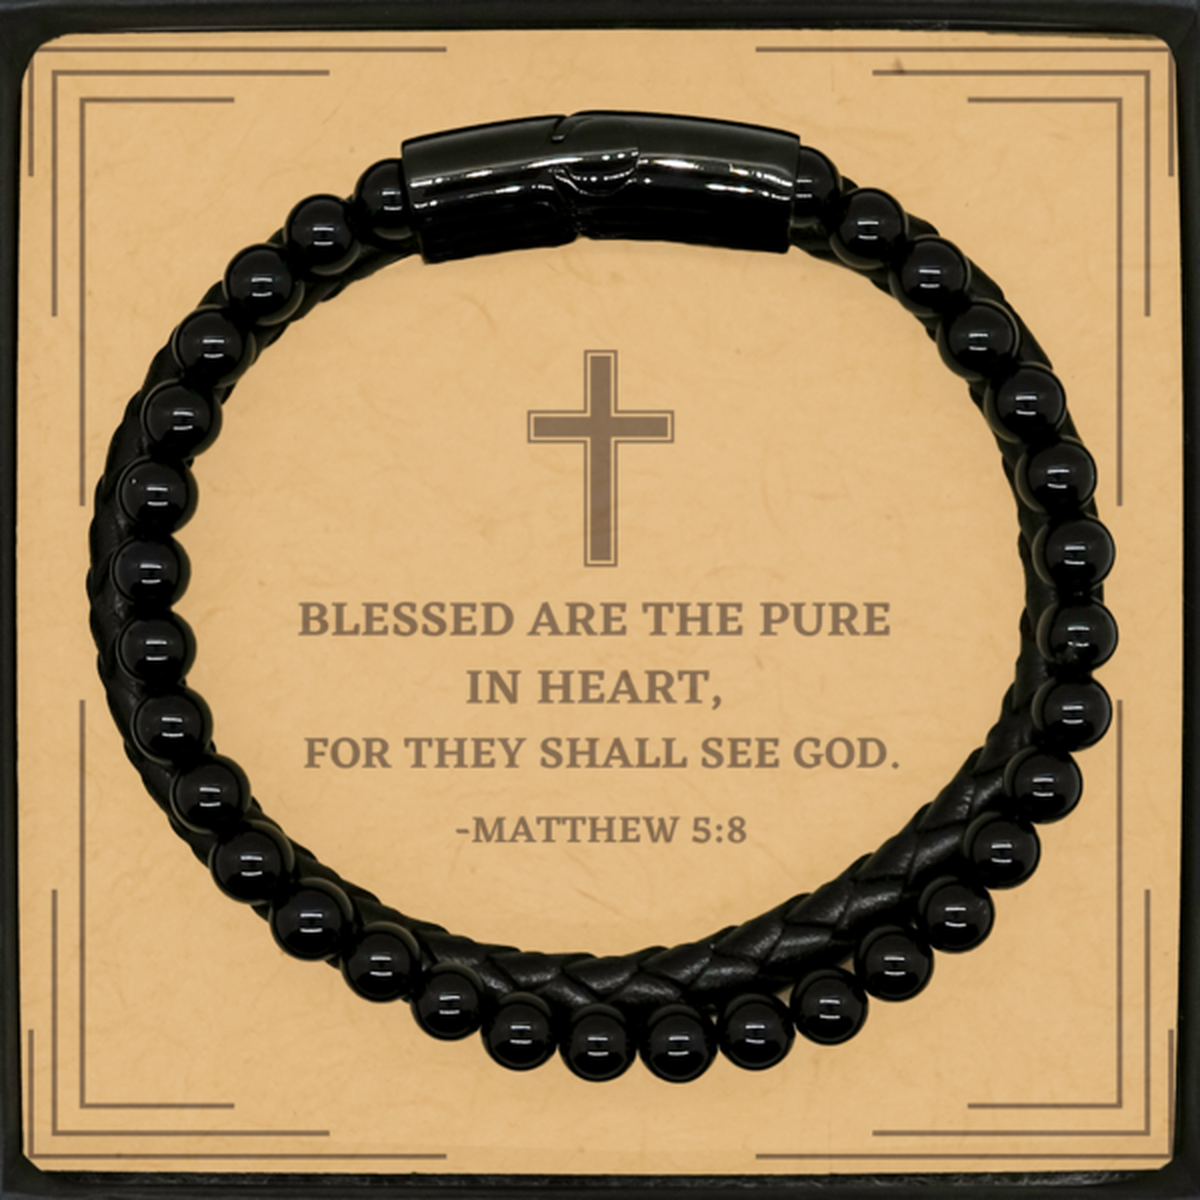 Baptism Gifts For Teenage Boys Girls, Christian Bible Verse Stone Leather Bracelet, Blessed are the pure in heart, Confirmation Gifts, Bible Verse Card for Son, Godson, Grandson